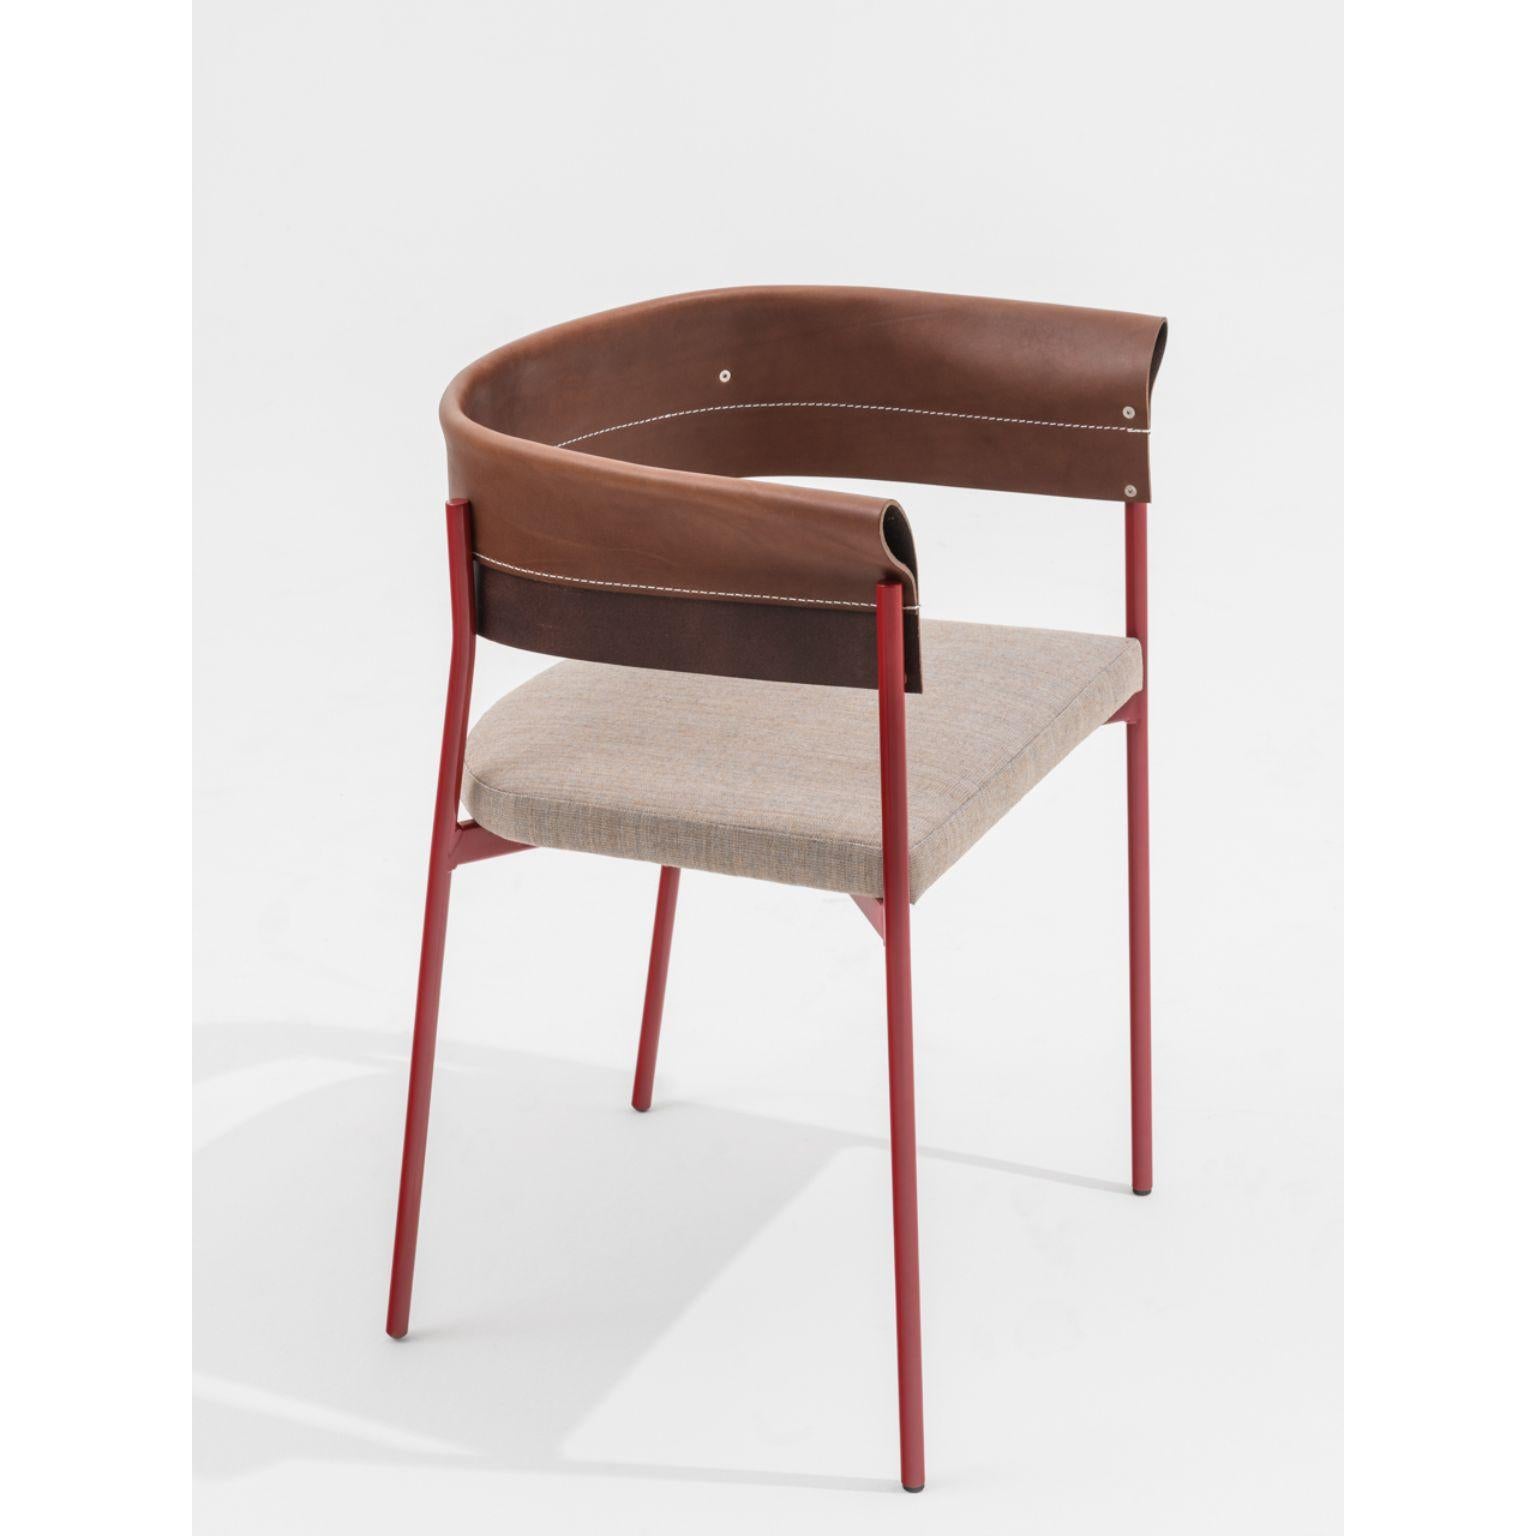 Pair of Gomito chairs by SEM
Dimensions: W 54 x D 45 x H 75 cm
Material:Lacquered hand-welved steel frame in colours, Backrest in precious folded and sewn leather,Upholstered seat in fabric Canvas 2 by Kvadrat.
Also available in different